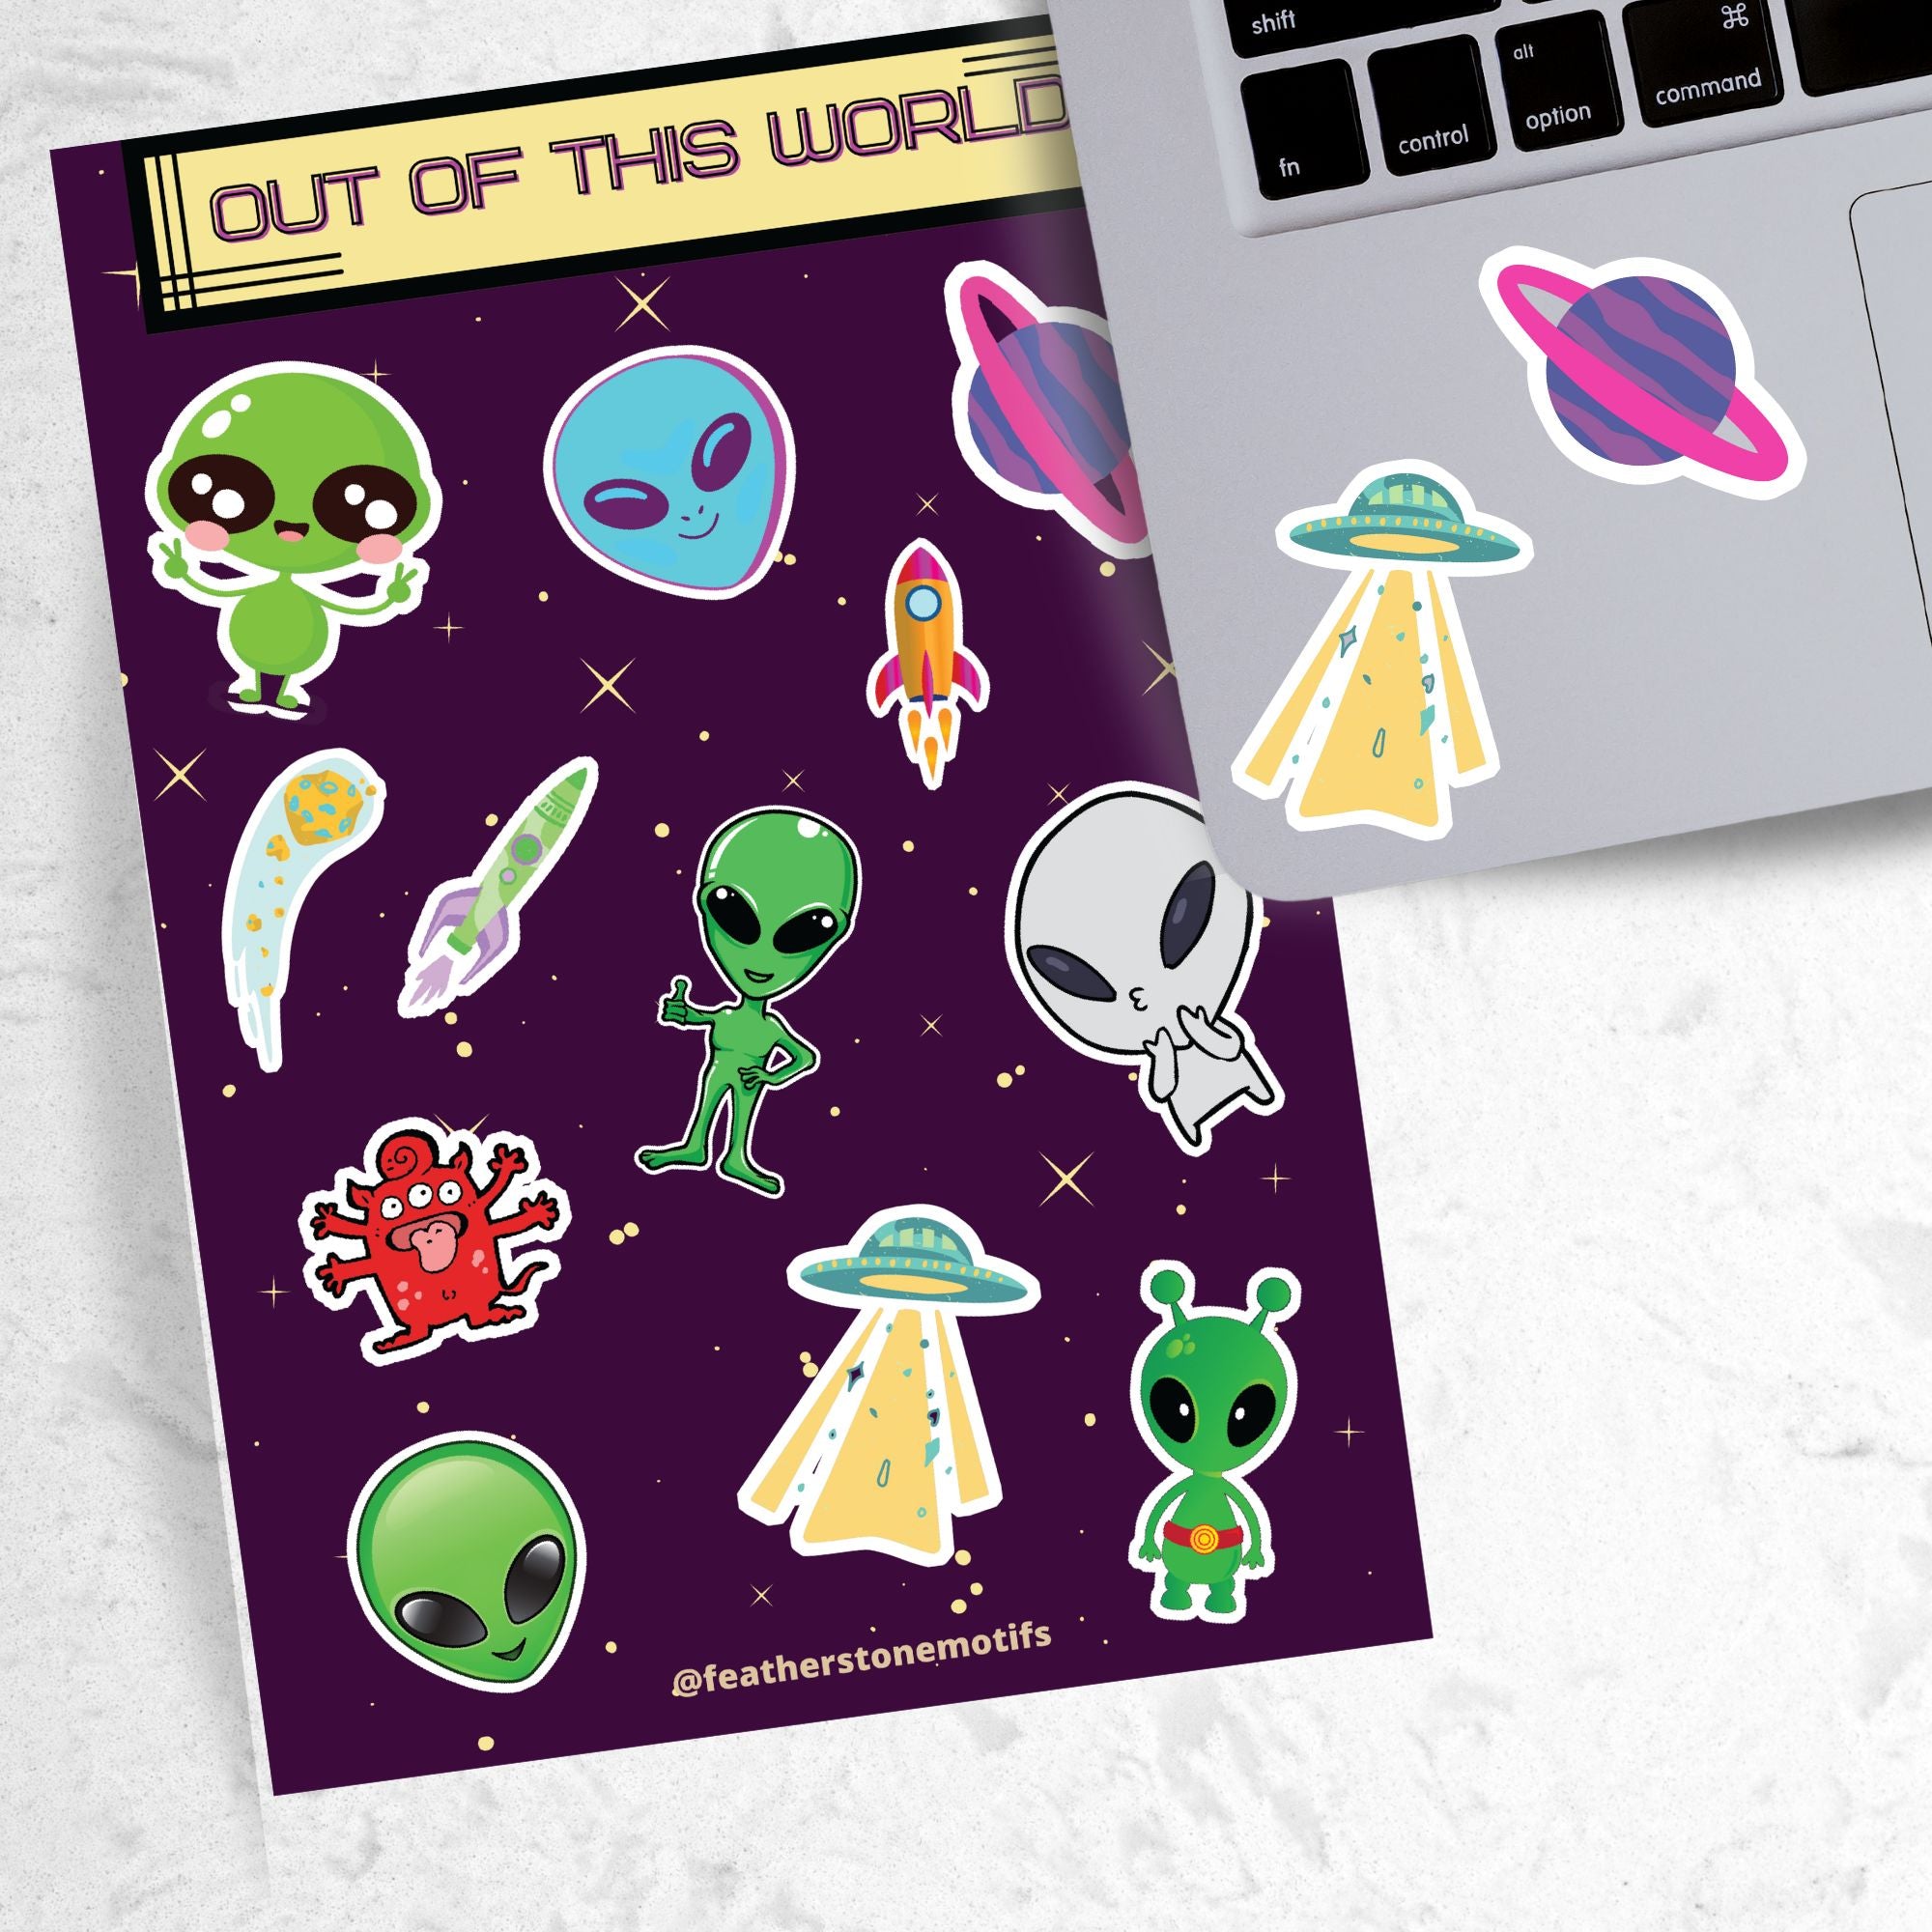 This sticker sheet is out of this world with individual stickers of aliens, space ships, planets, and alien creatures. This image is of a laptop with 2 of the stickers on it.